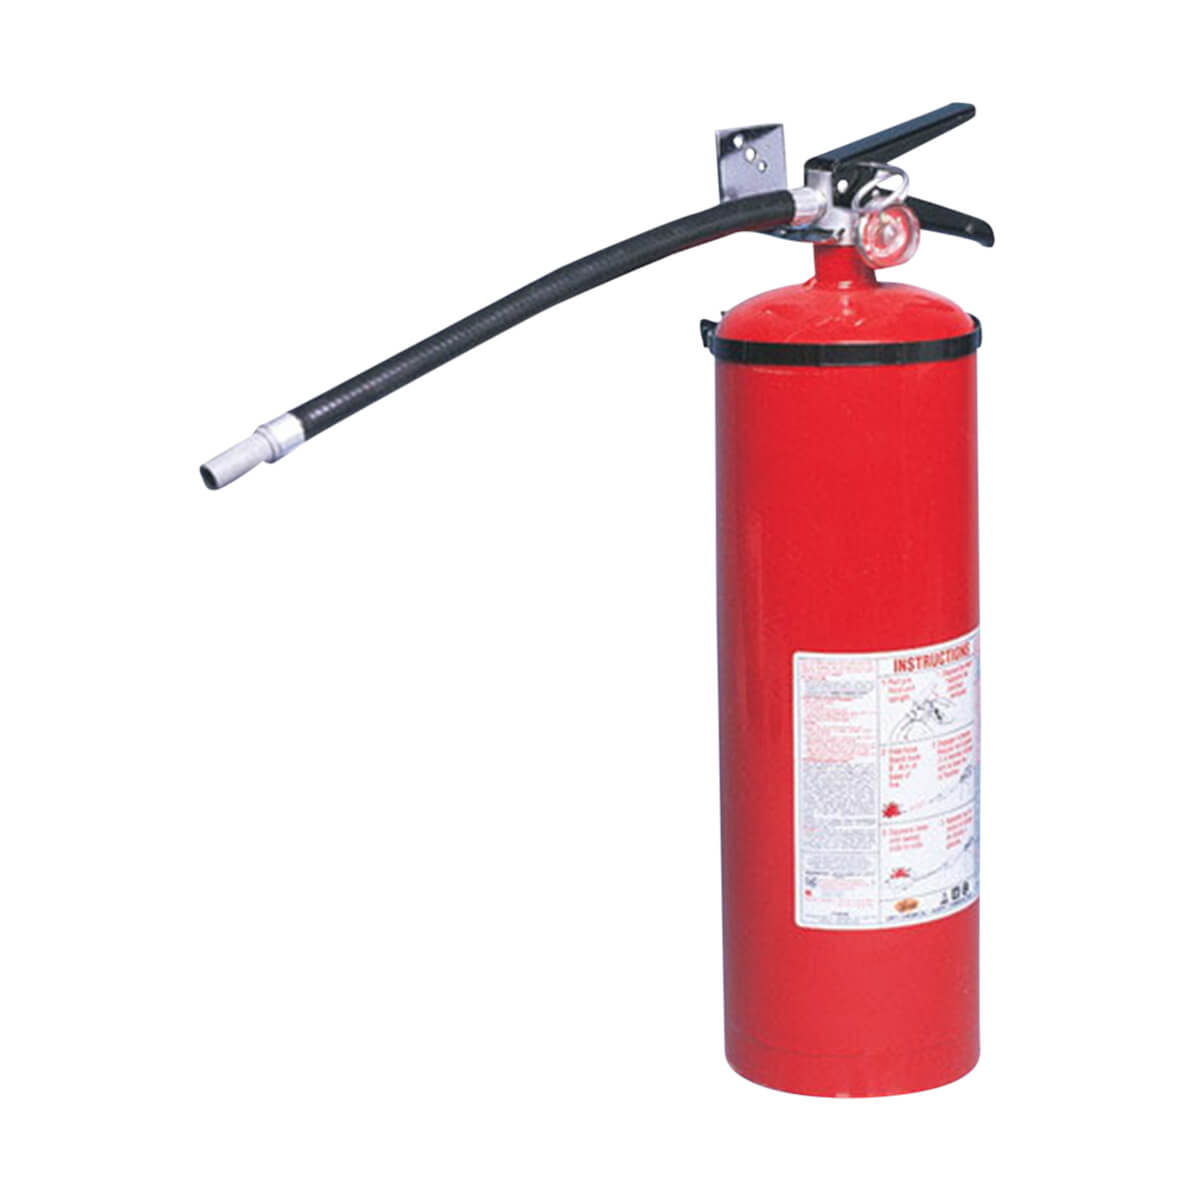 Home/Business Fire Extinguisher - 4-A:60-B:C Pro Series